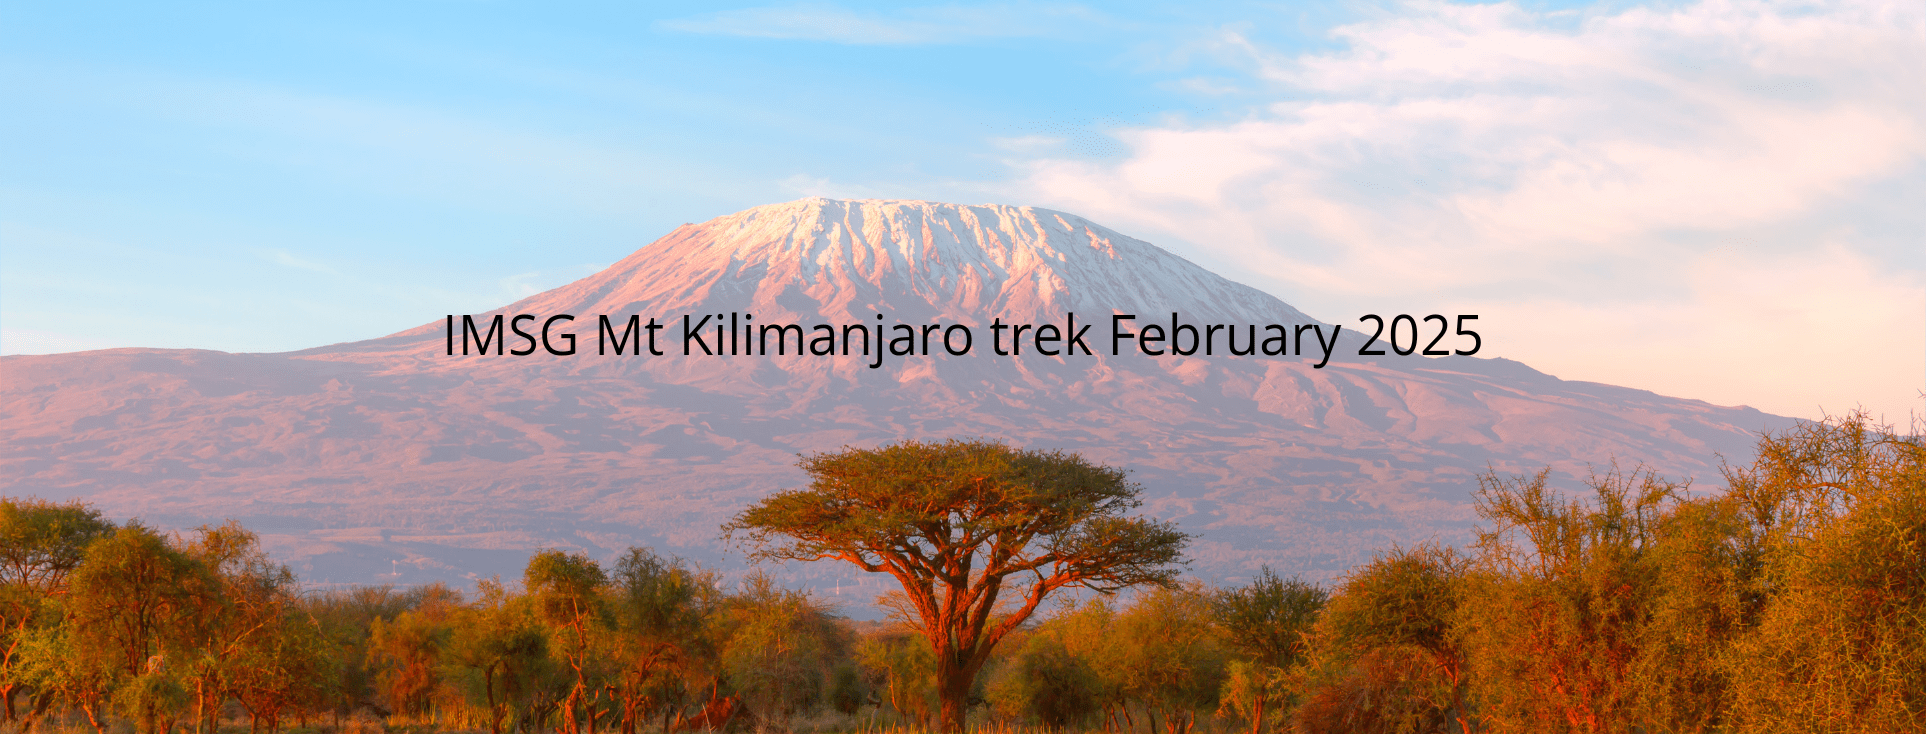 You are currently viewing IMSG Mt Kilimanjaro trek February 2025